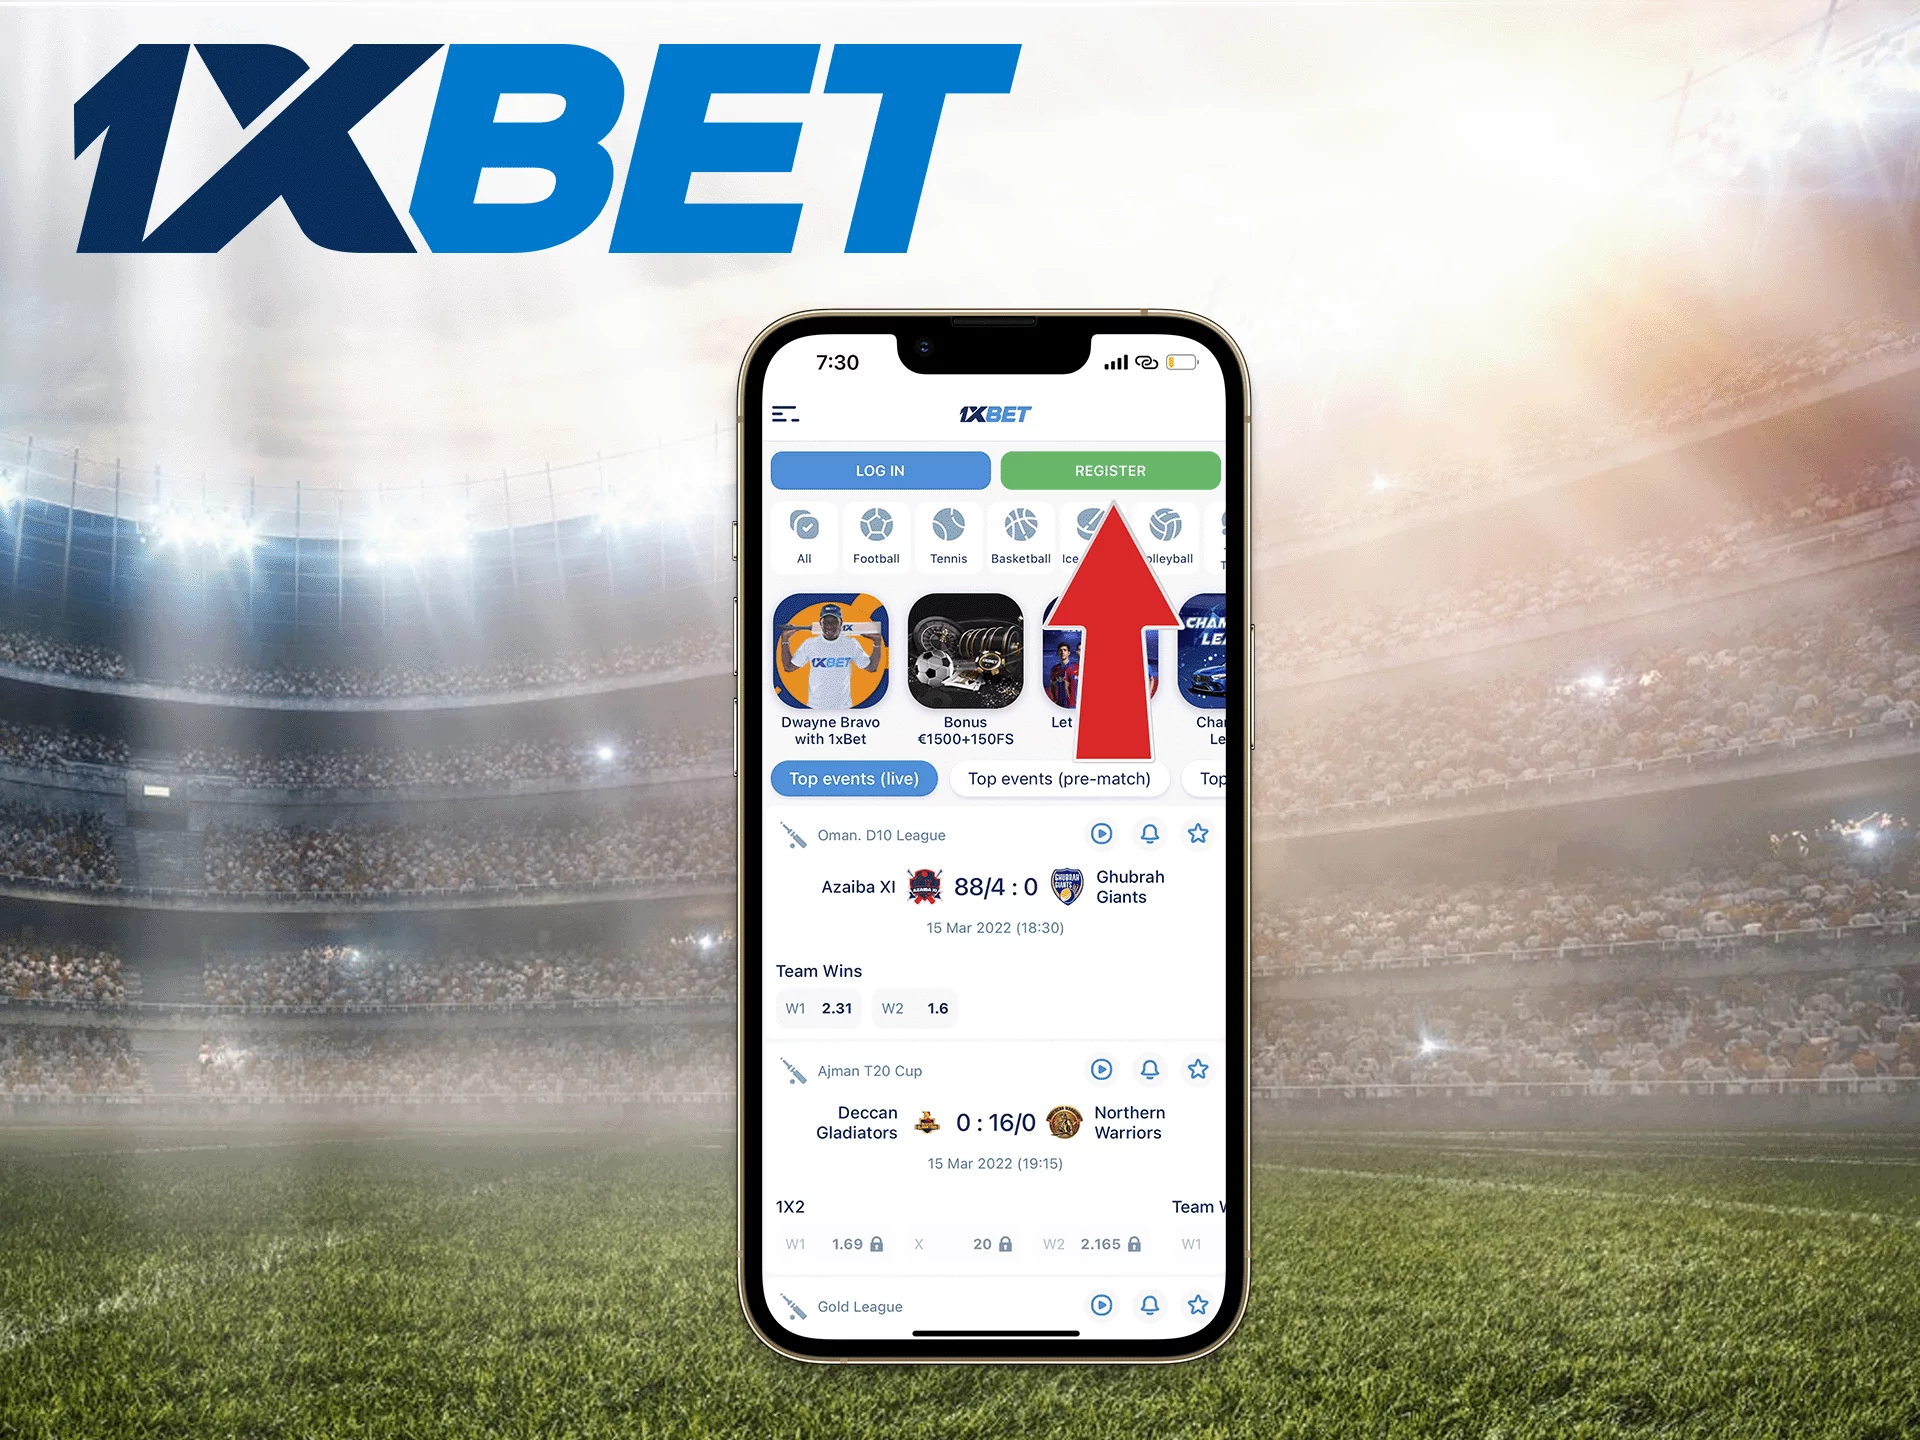 Instructions for for creating account in 1xbet app.